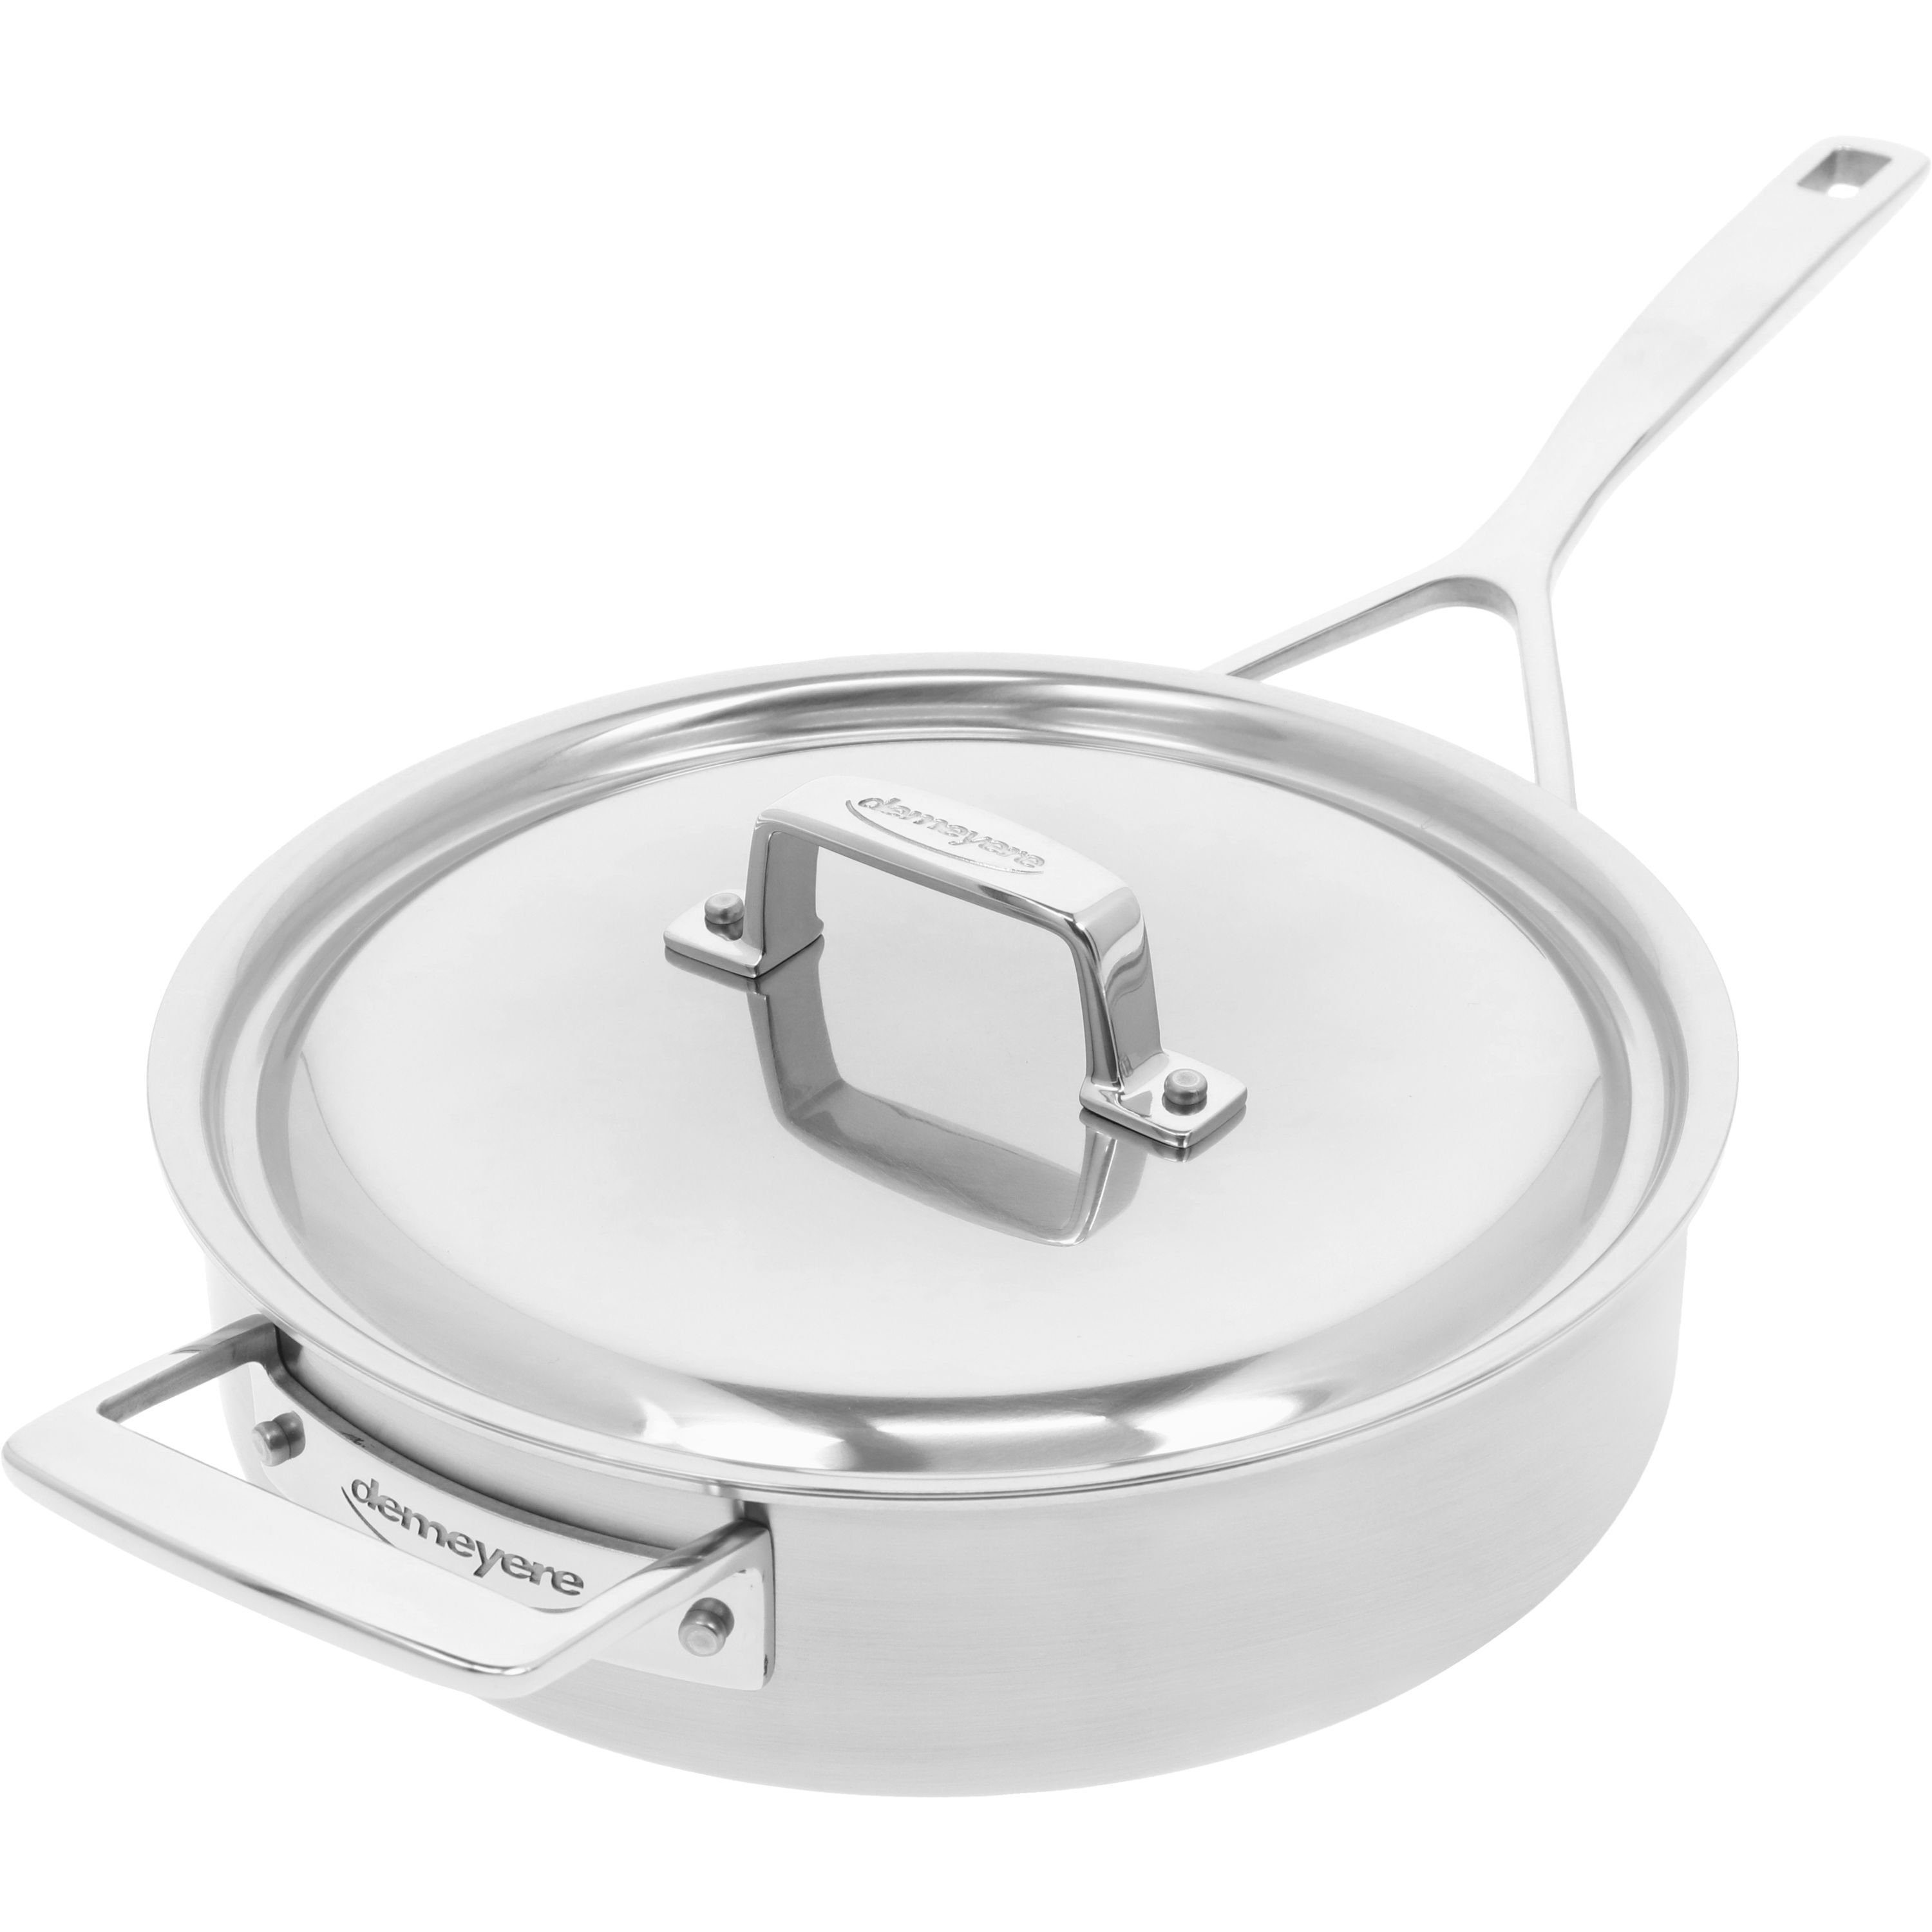 Demeyere Essential 5-ply 3-qt Stainless Steel Saucepan with Lid, 3